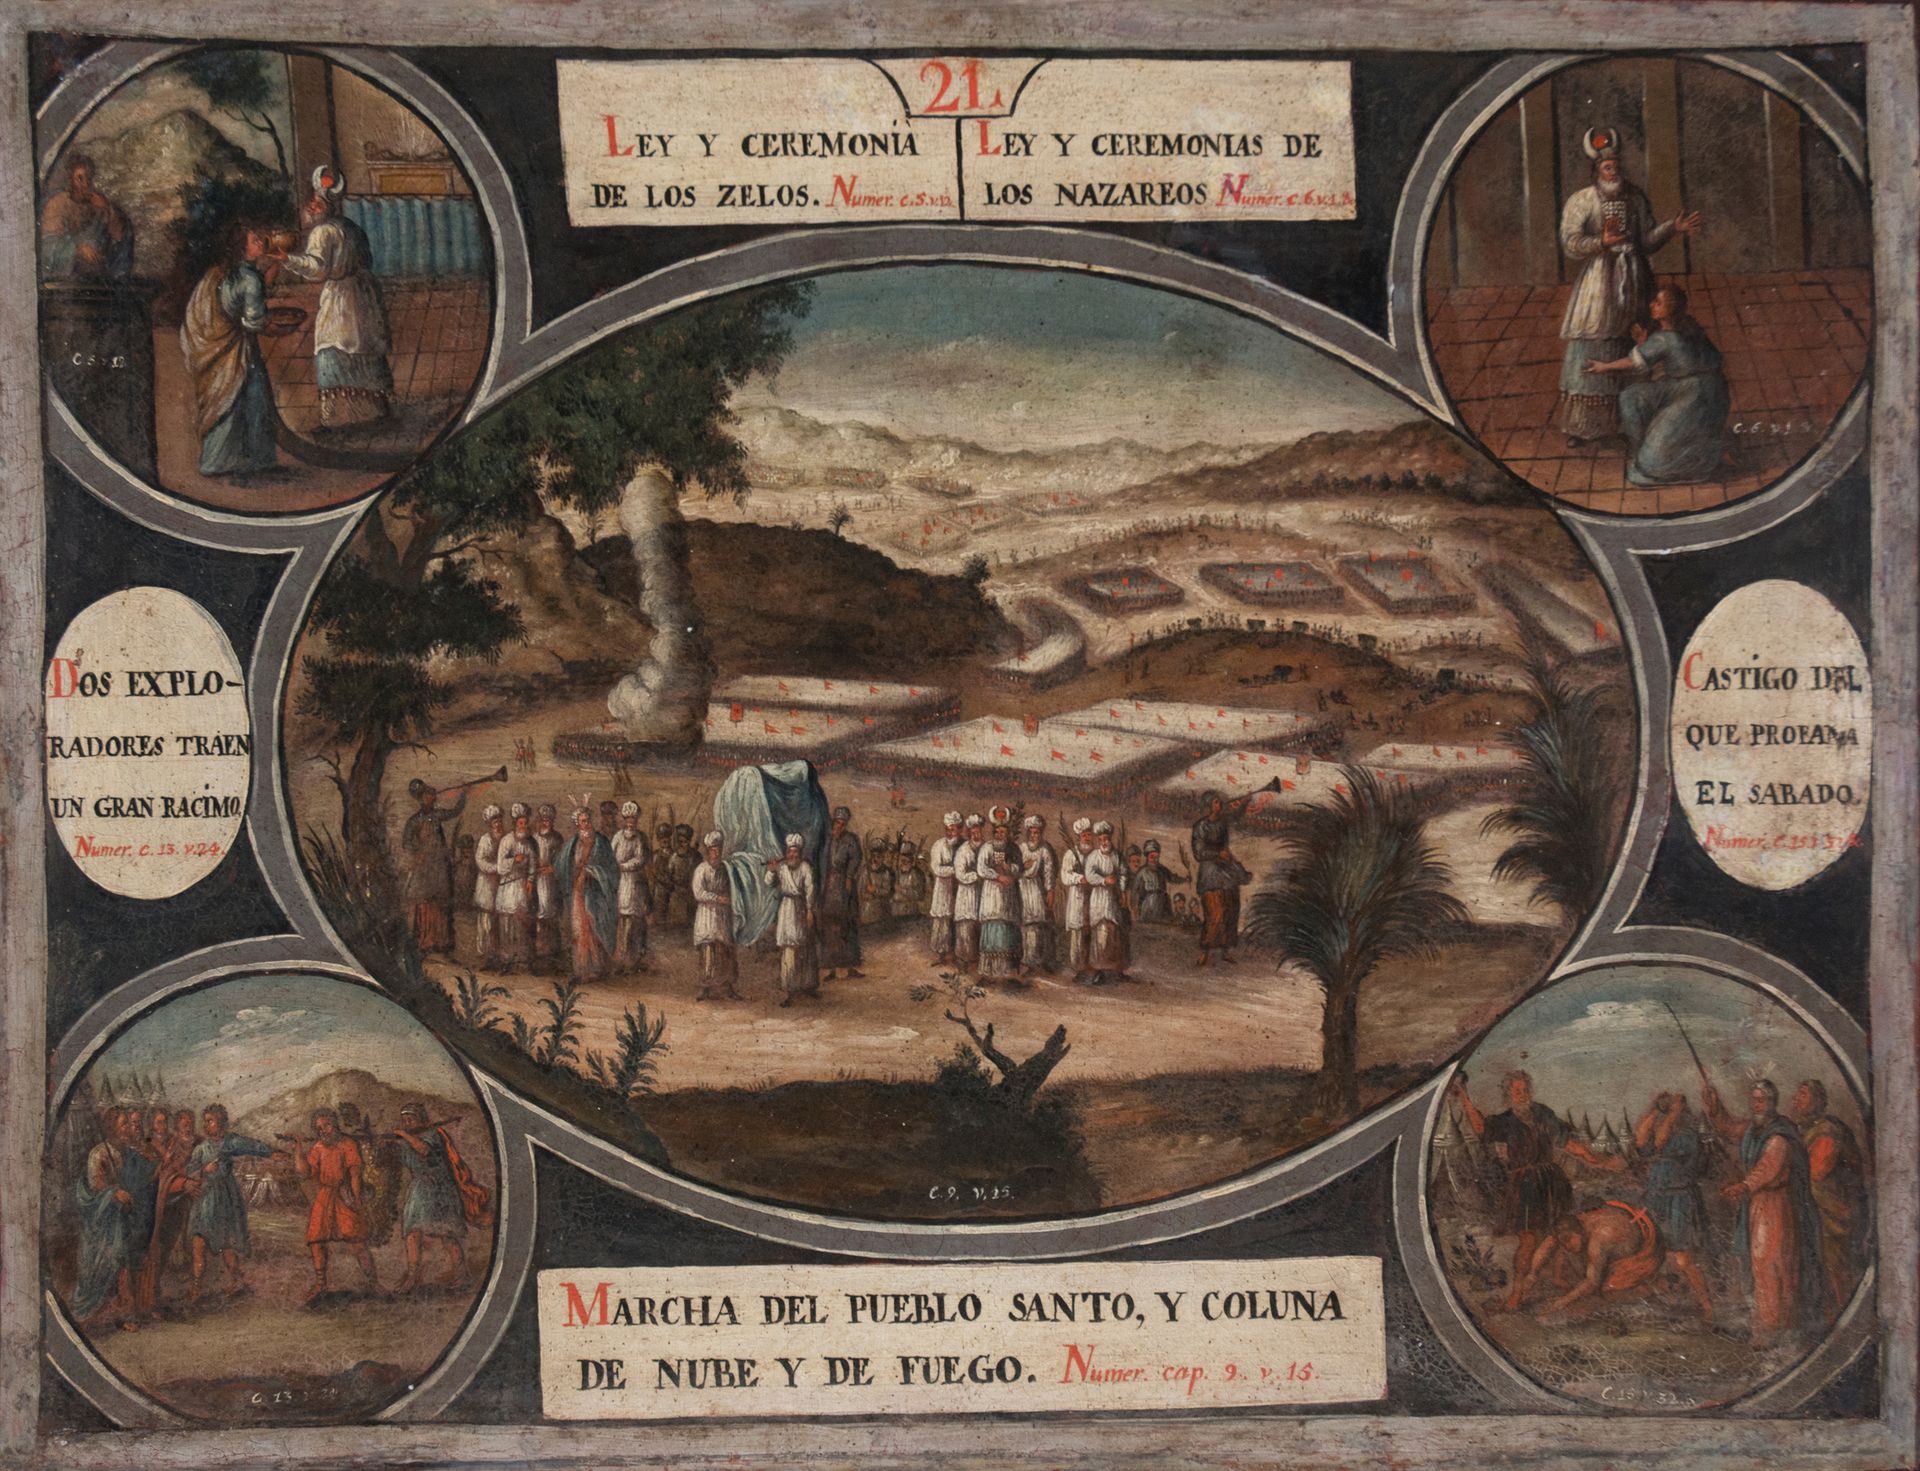 Colonial School. Mexico. 17th century. 
"Law and Ceremony of Zelos" "Law and cer&hellip;